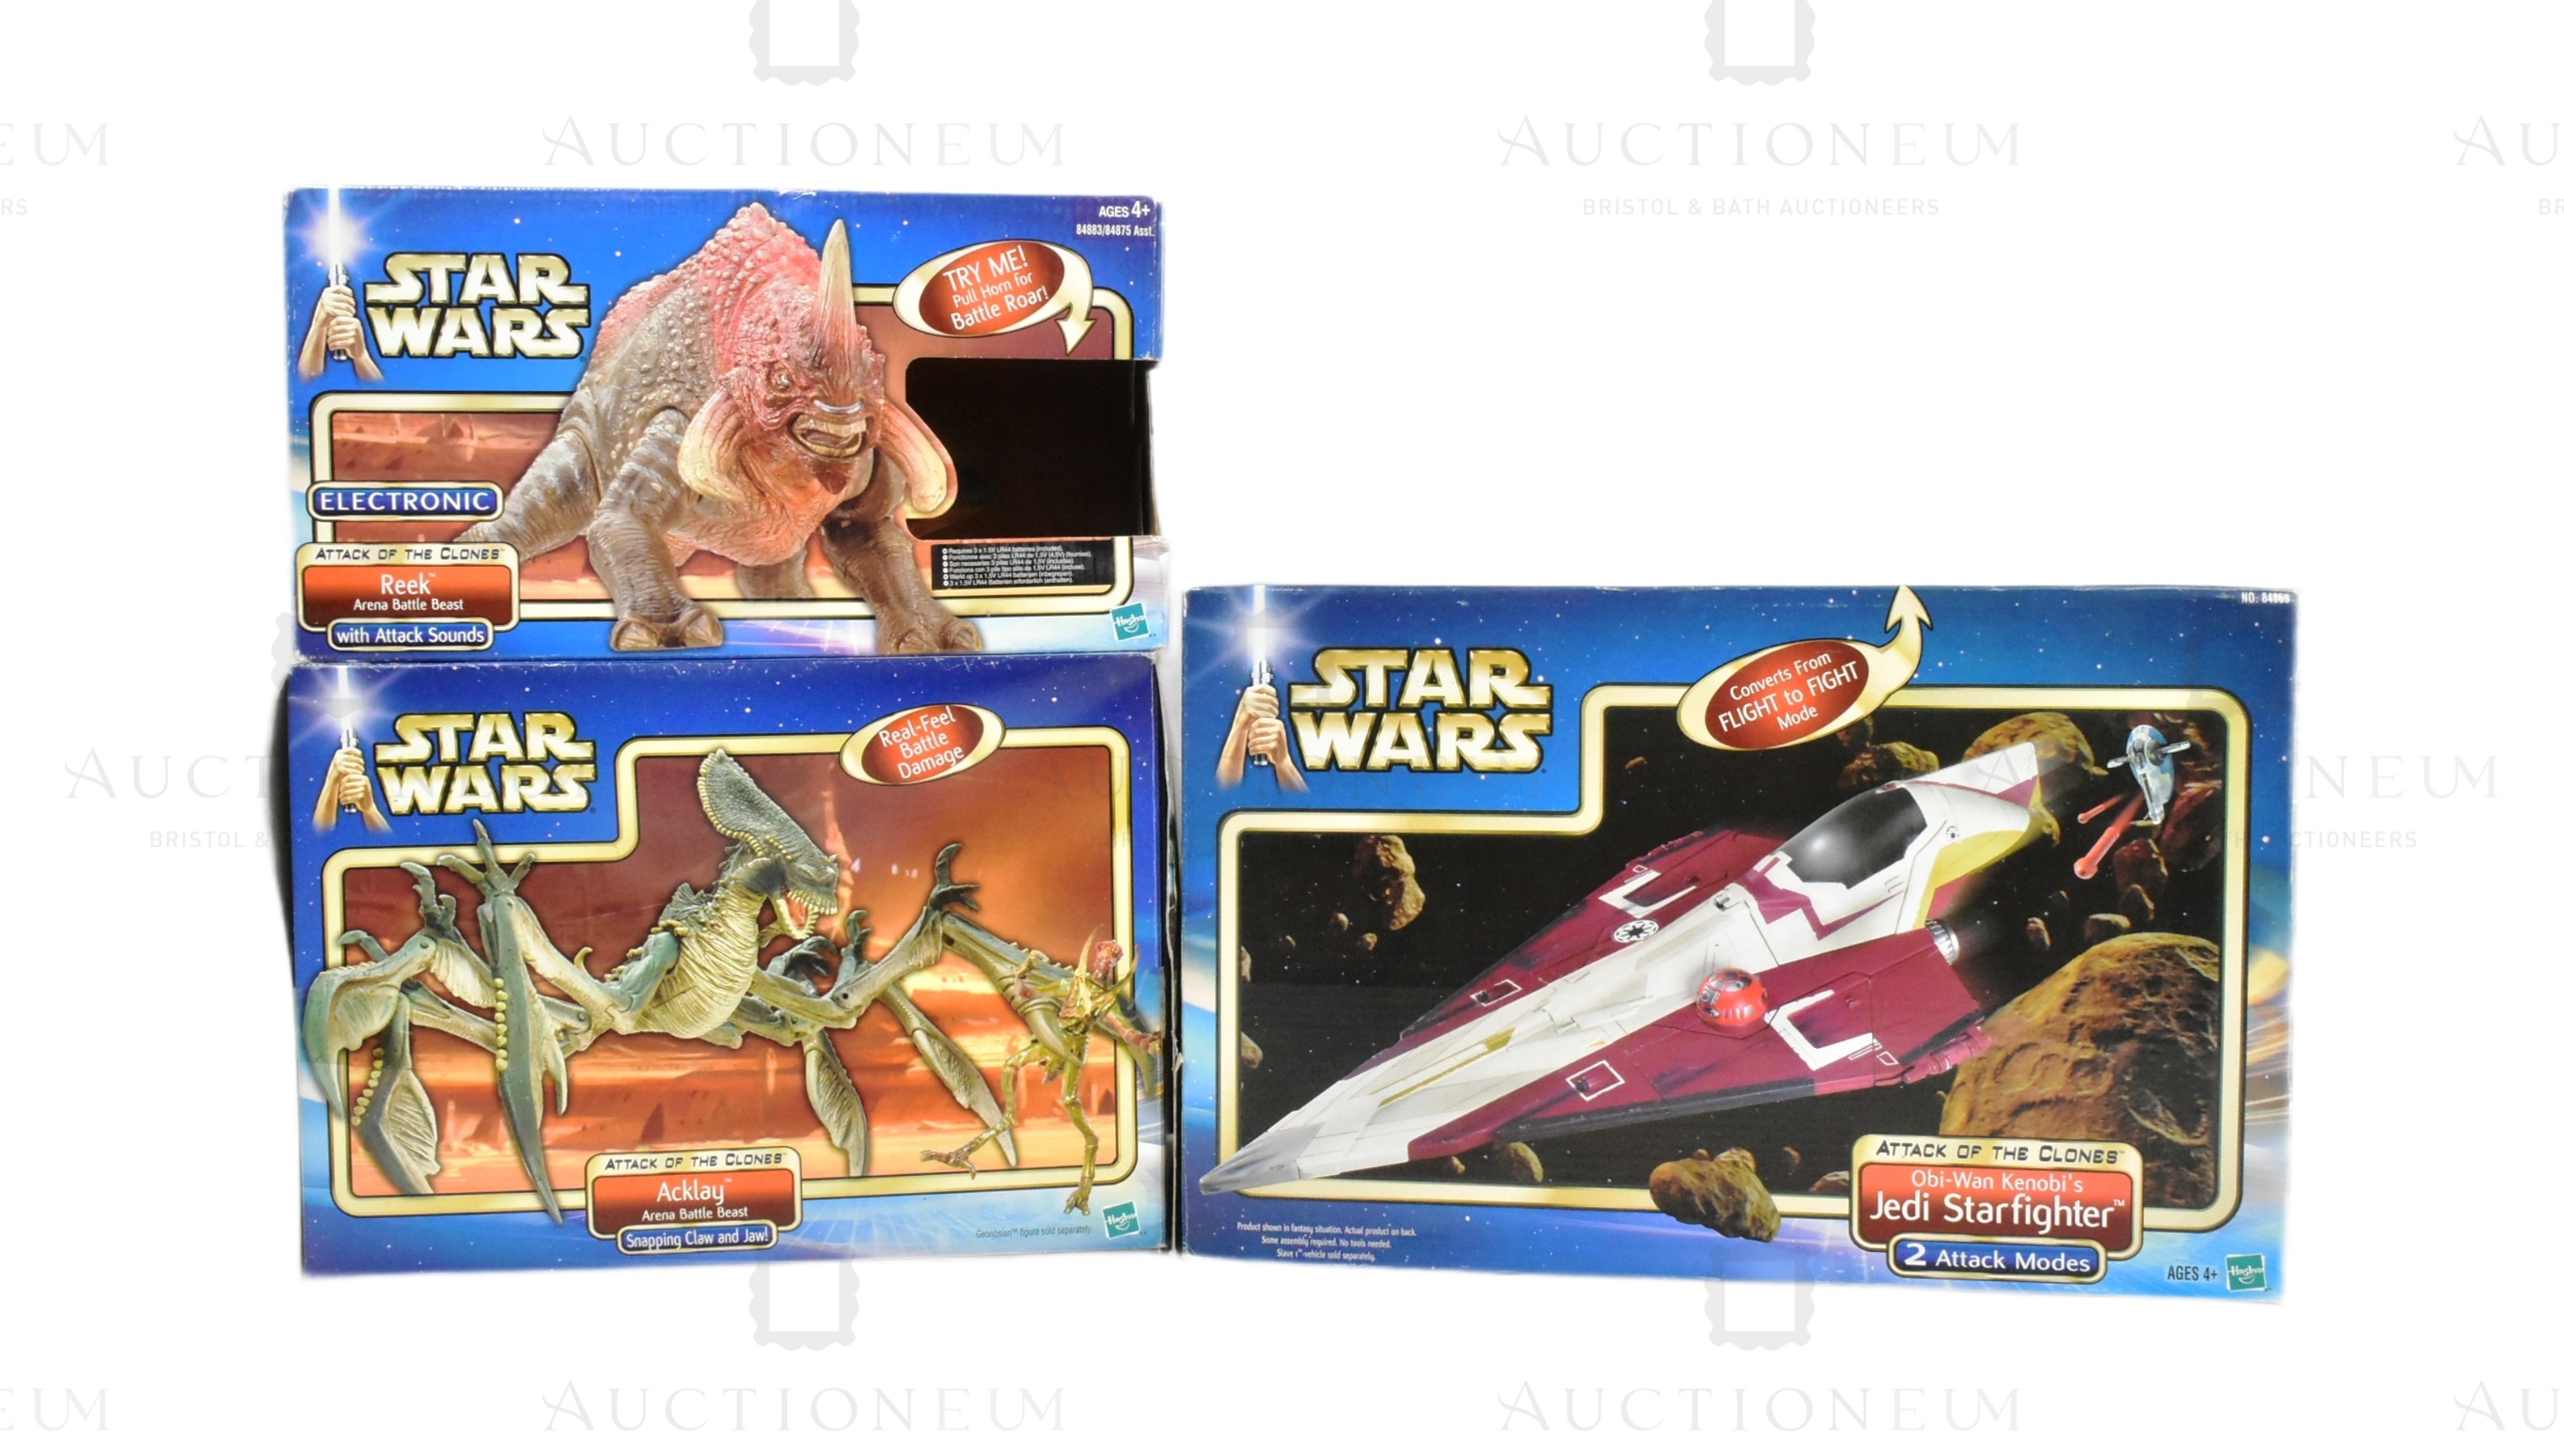 STAR WARS - ATTACK OF THE CLONES - ACTION FIGURE PLAYSETS